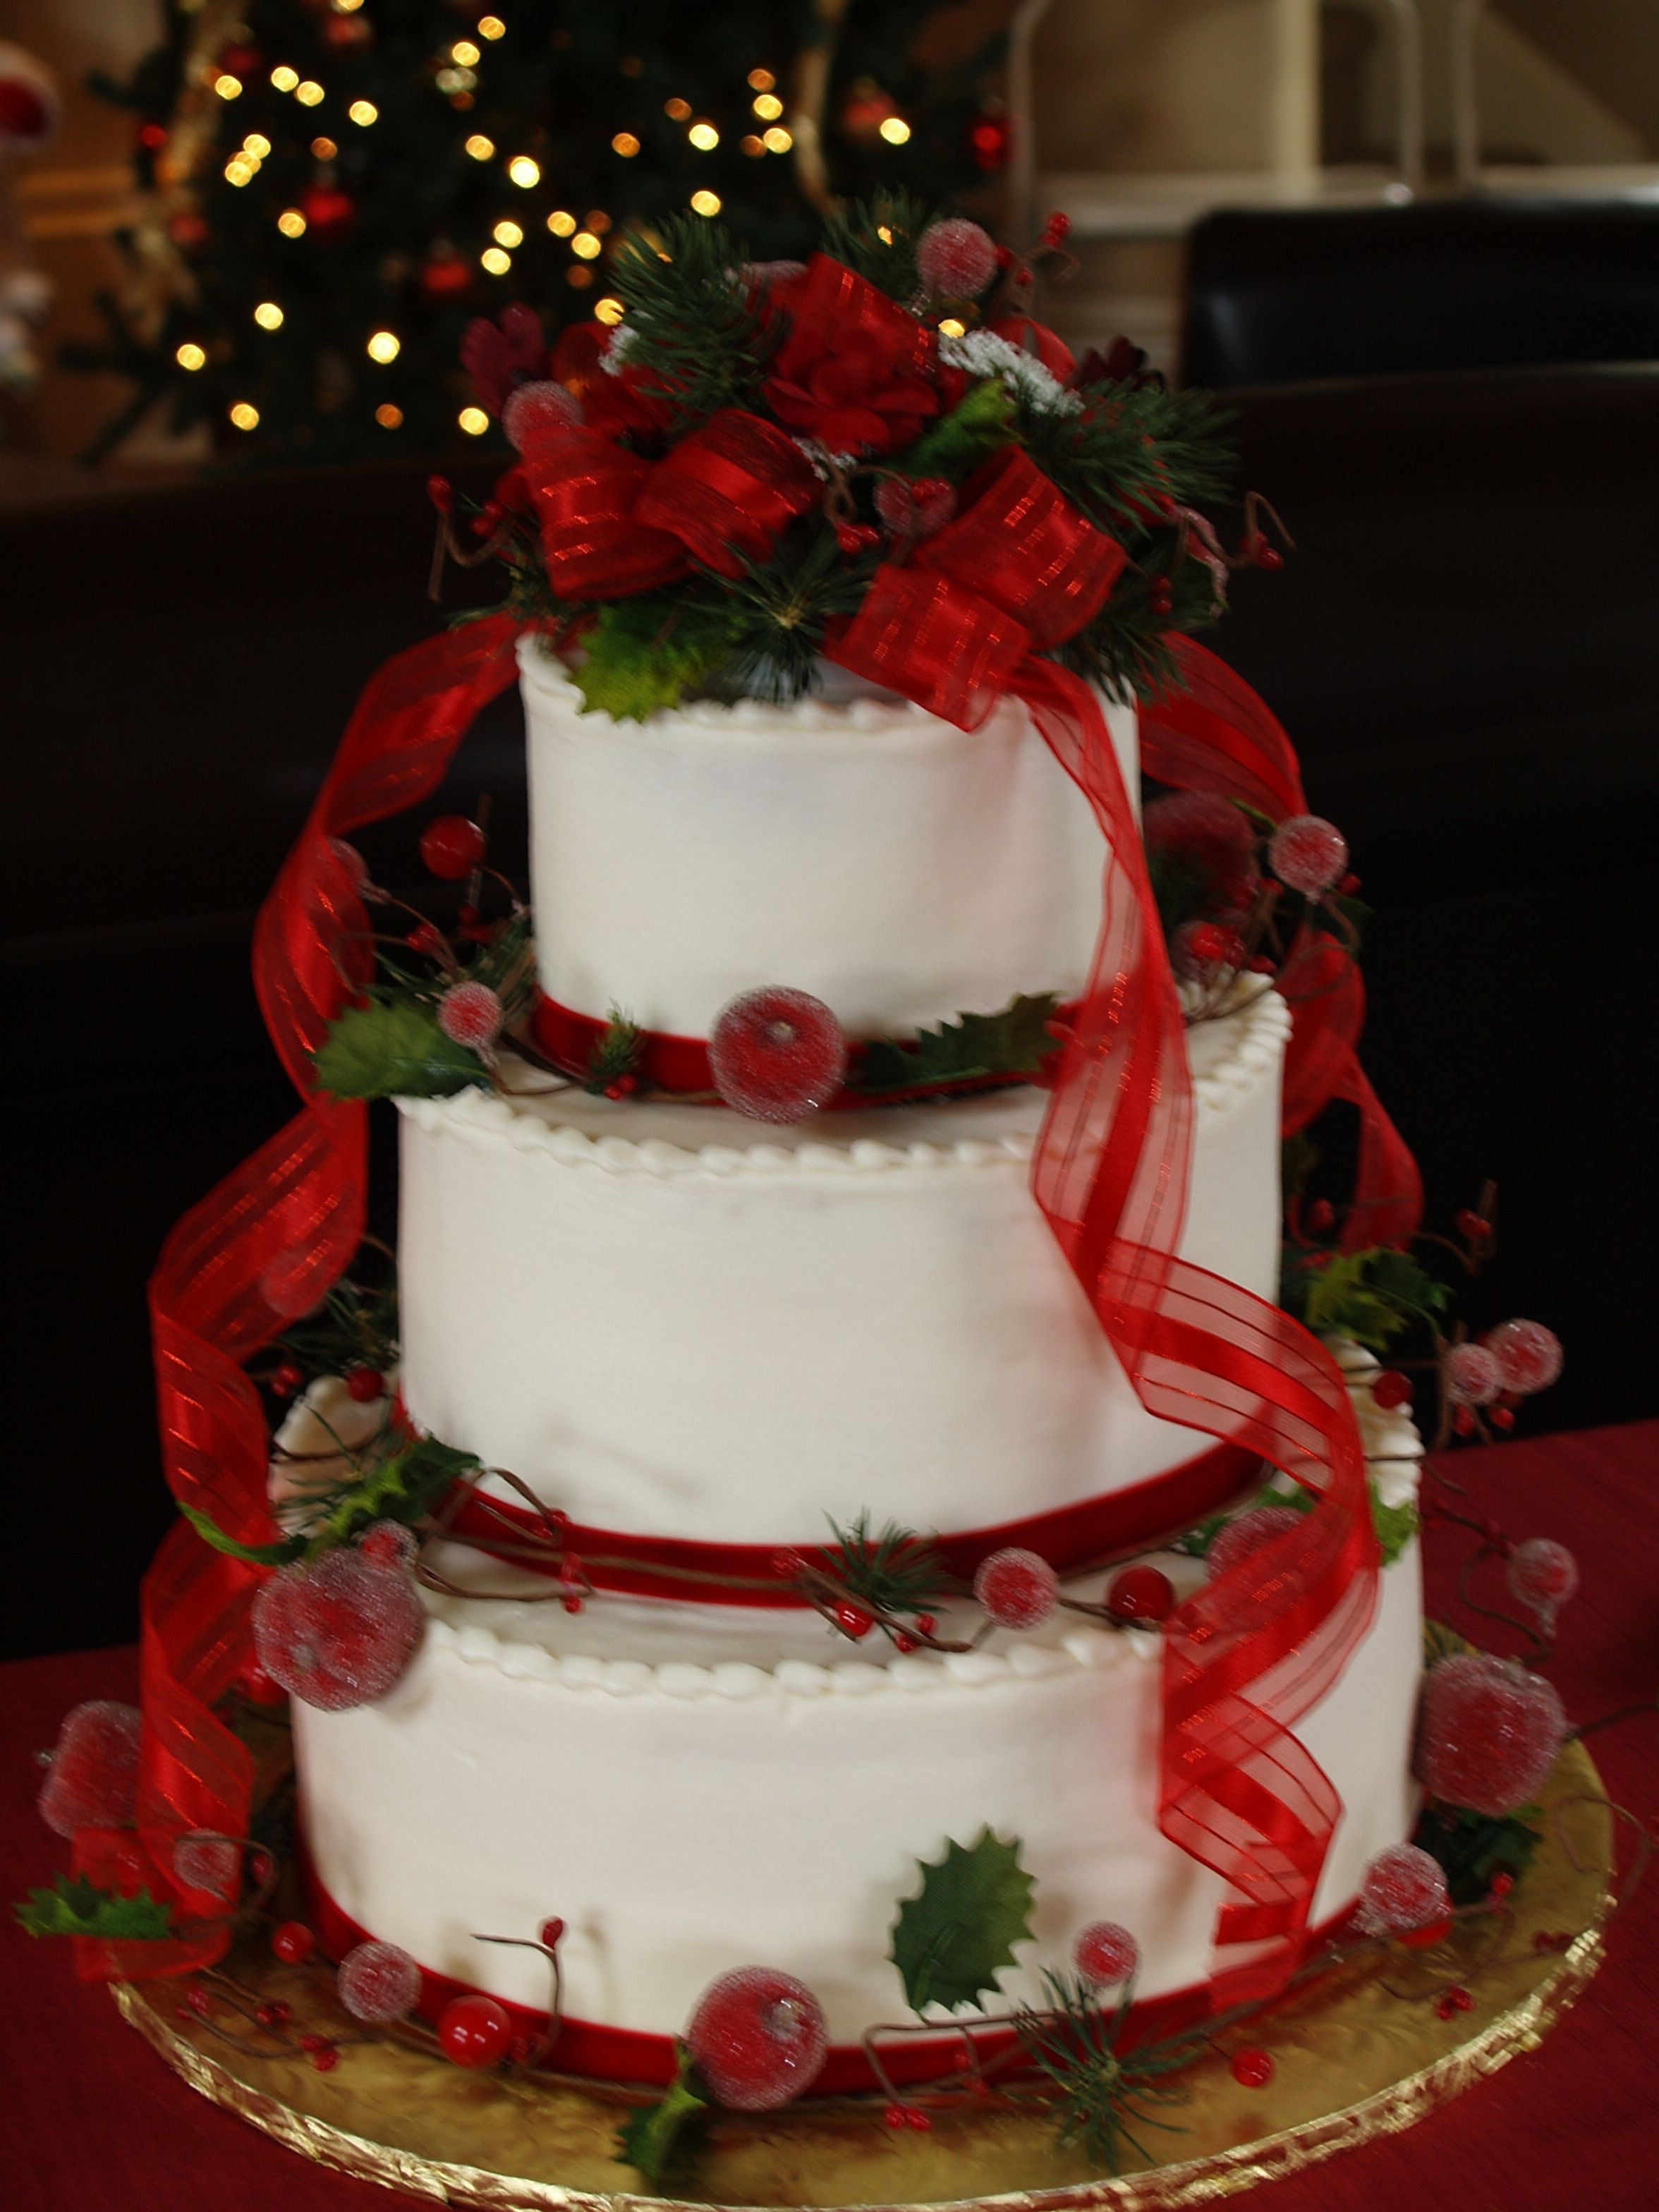 Christmas theme cake from cakecentral